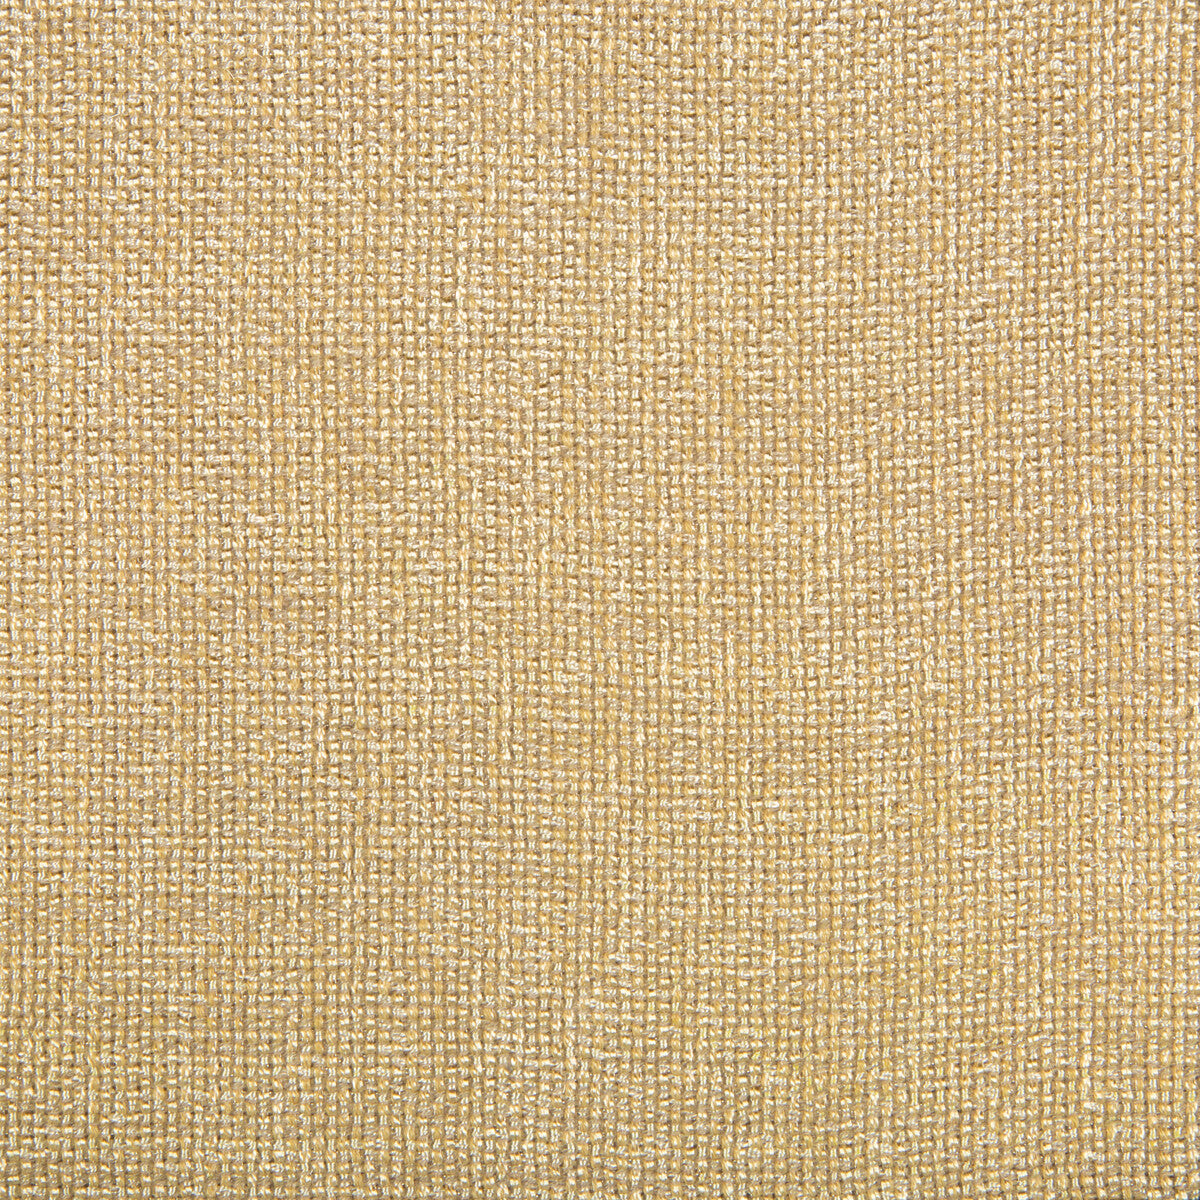 Kravet Contract fabric in 34926-16 color - pattern 34926.16.0 - by Kravet Contract